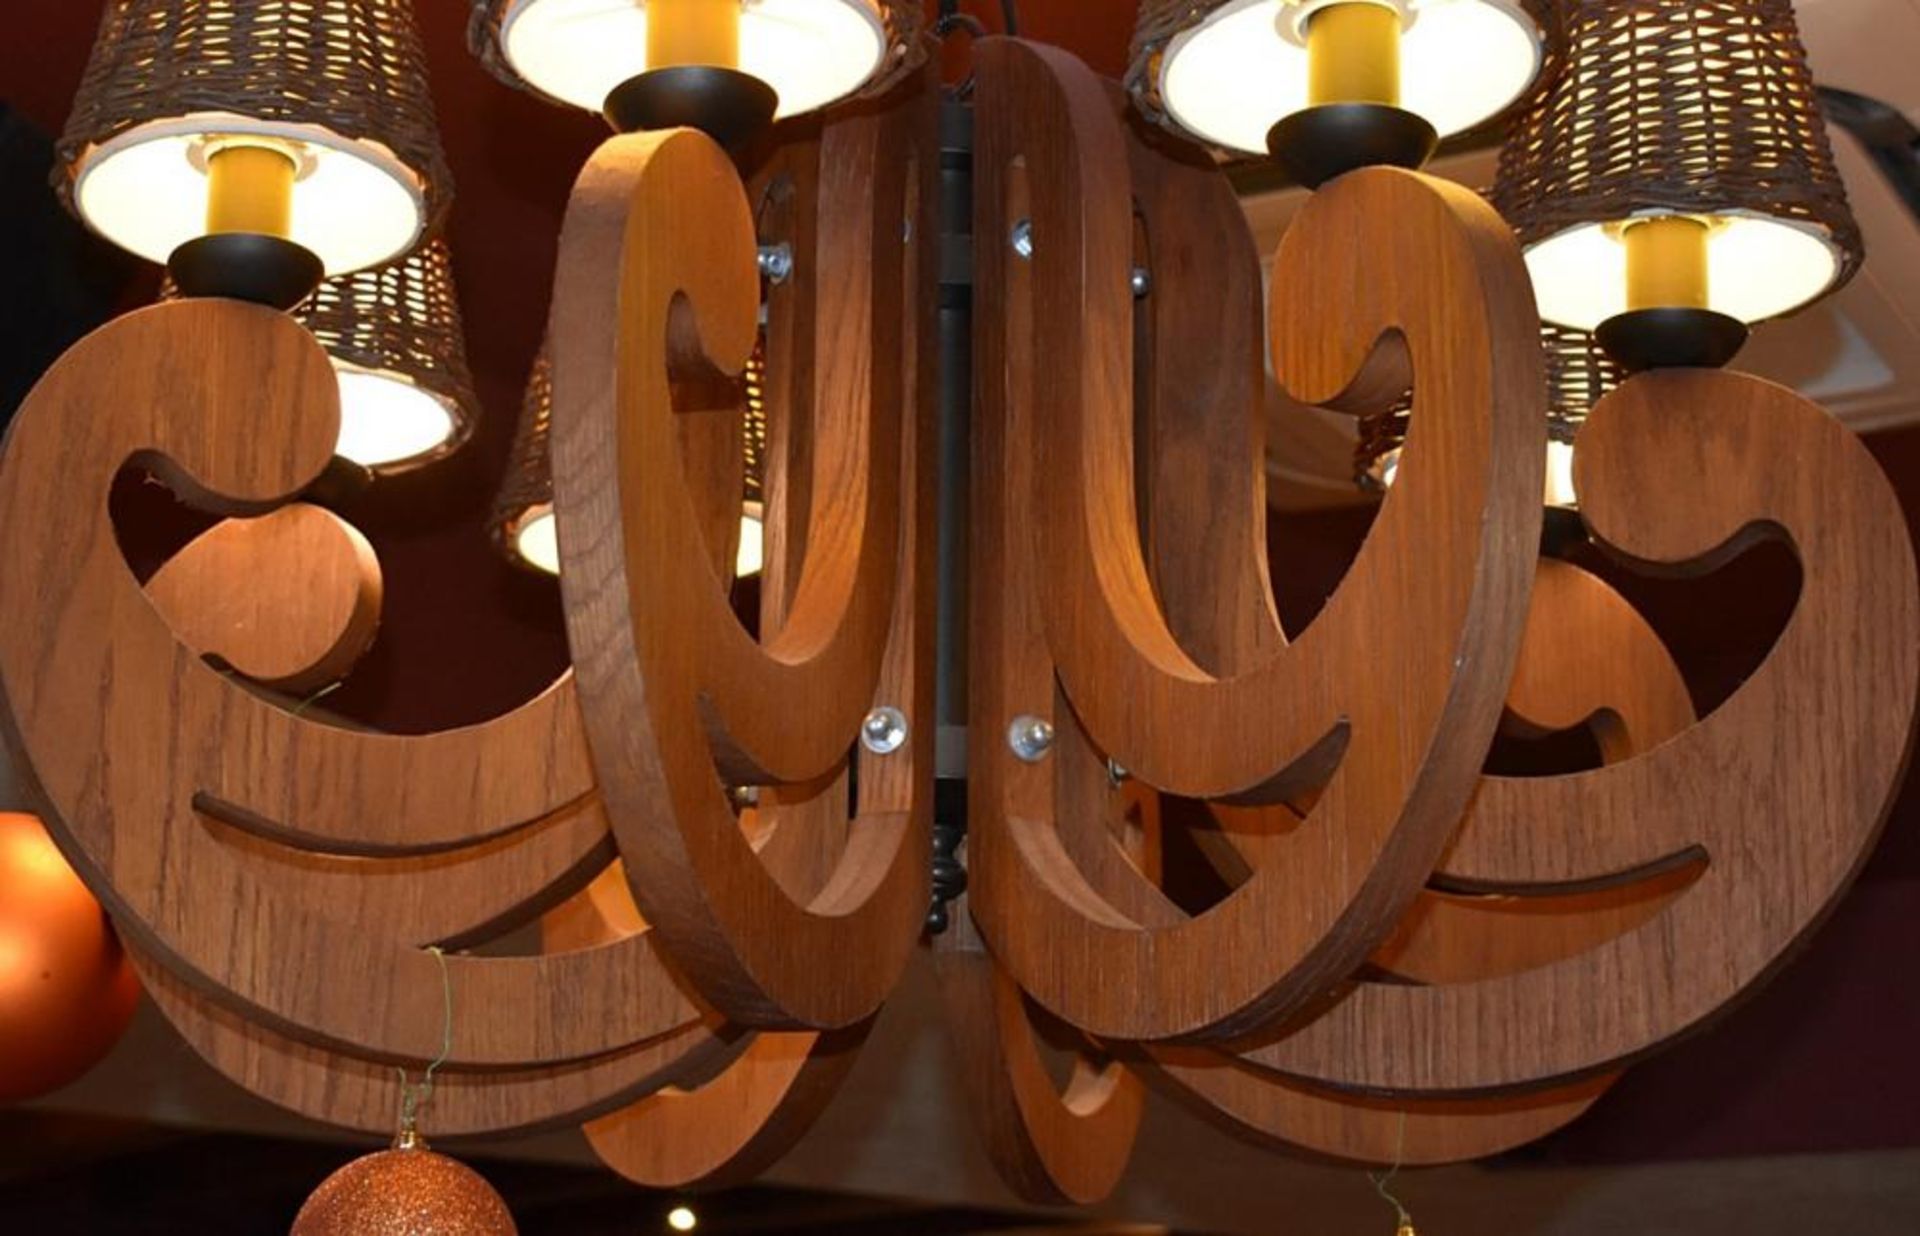 2 x Large Artisan Wooden Candelabra 8 Light Chandeliers - Approx Dimensions: Diameter 90cm - From - Image 6 of 6